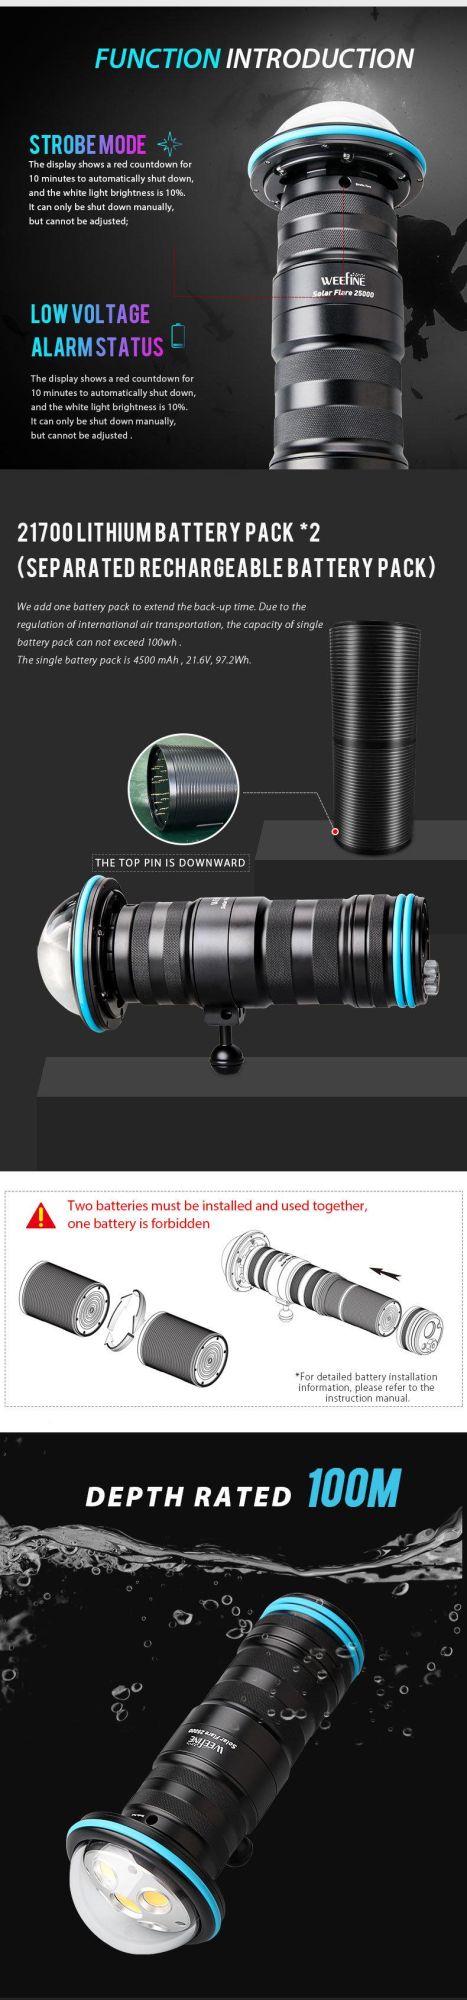 Outdoor Underwater Widest Angle Diving Flashlight of Weefine Brand for Deep Sea Photography Taking Photos